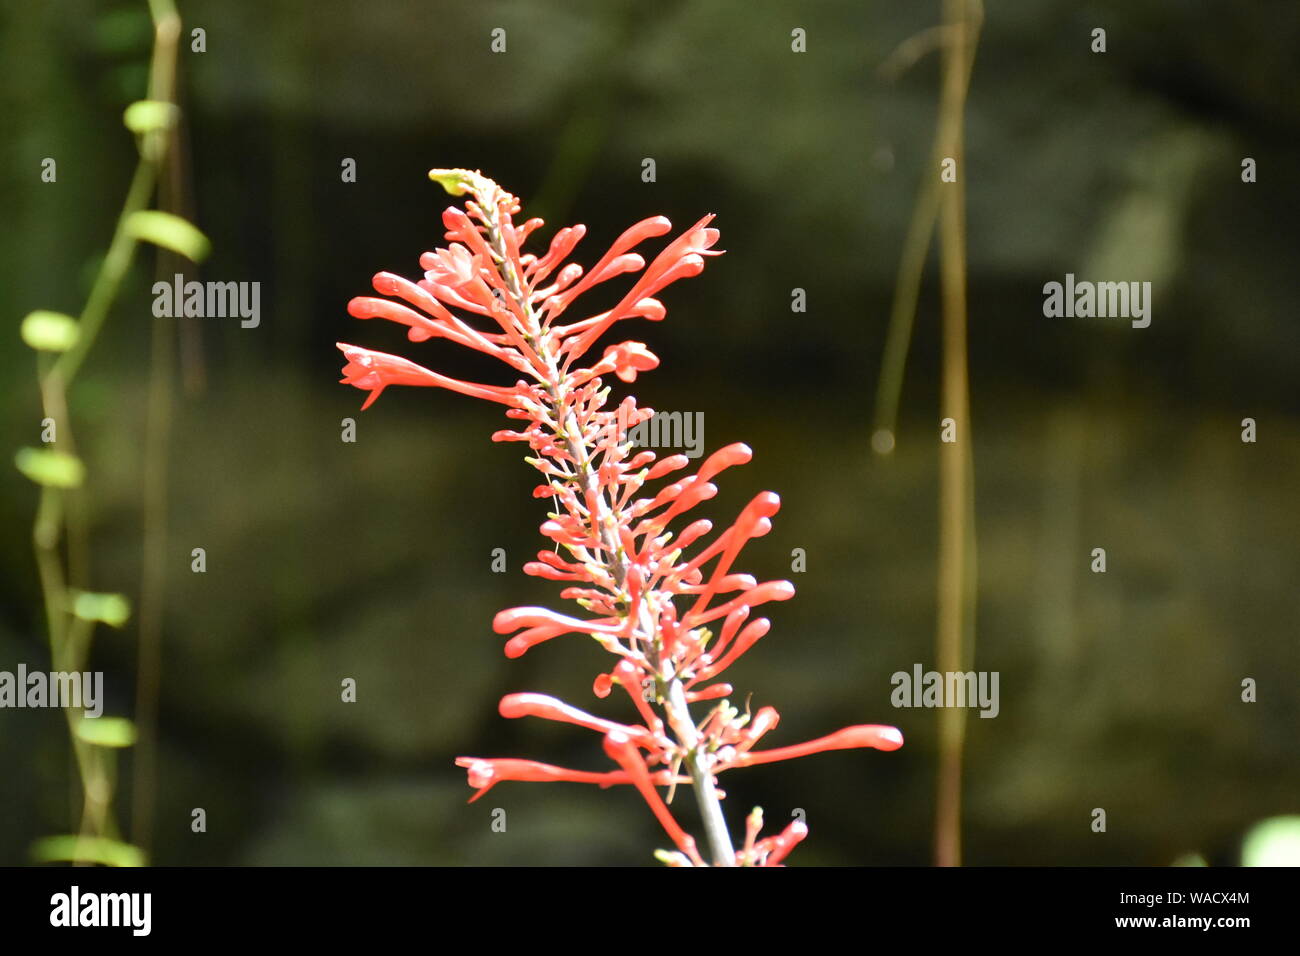 This Florida Nature picture is of a Firebush flower. The firebush shrub is commonly called a hummingbird bush because it attracts hummingbirds. Stock Photo